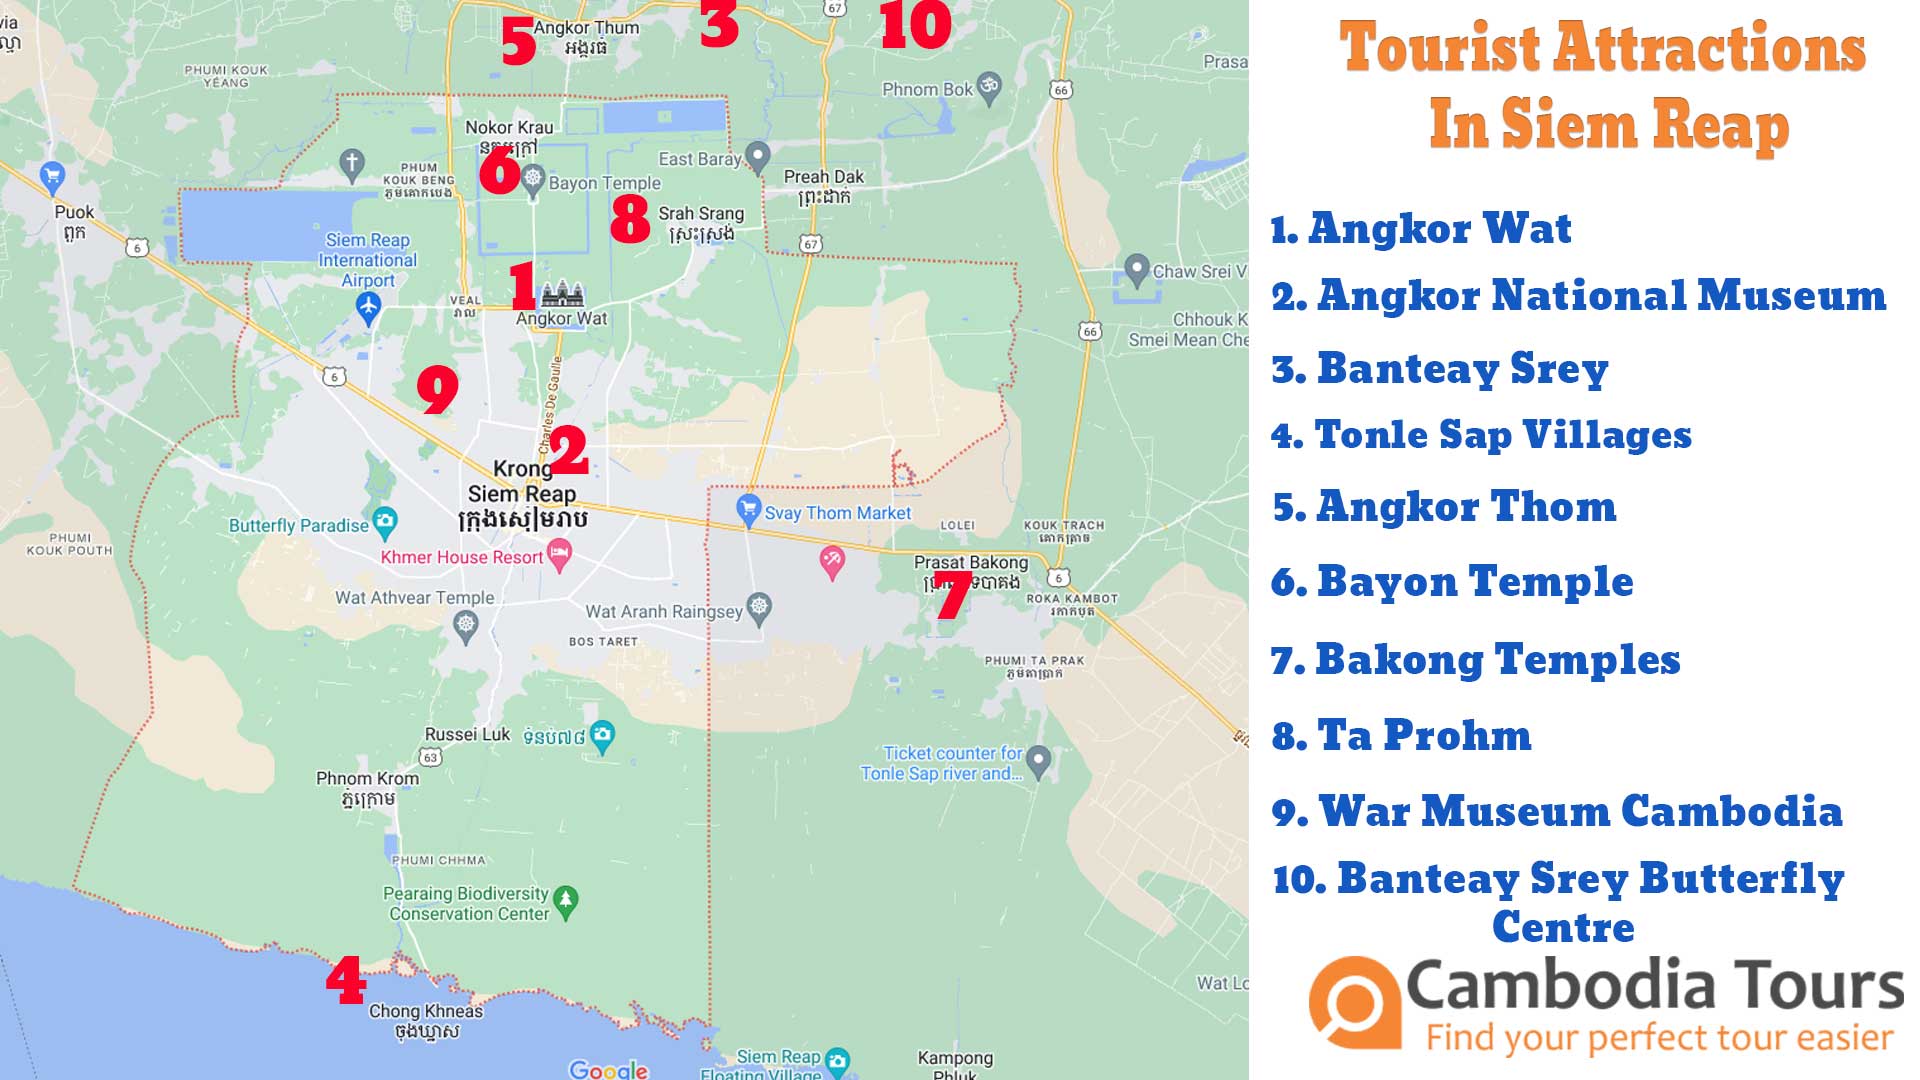 Siem Reap travel map - Best attractions